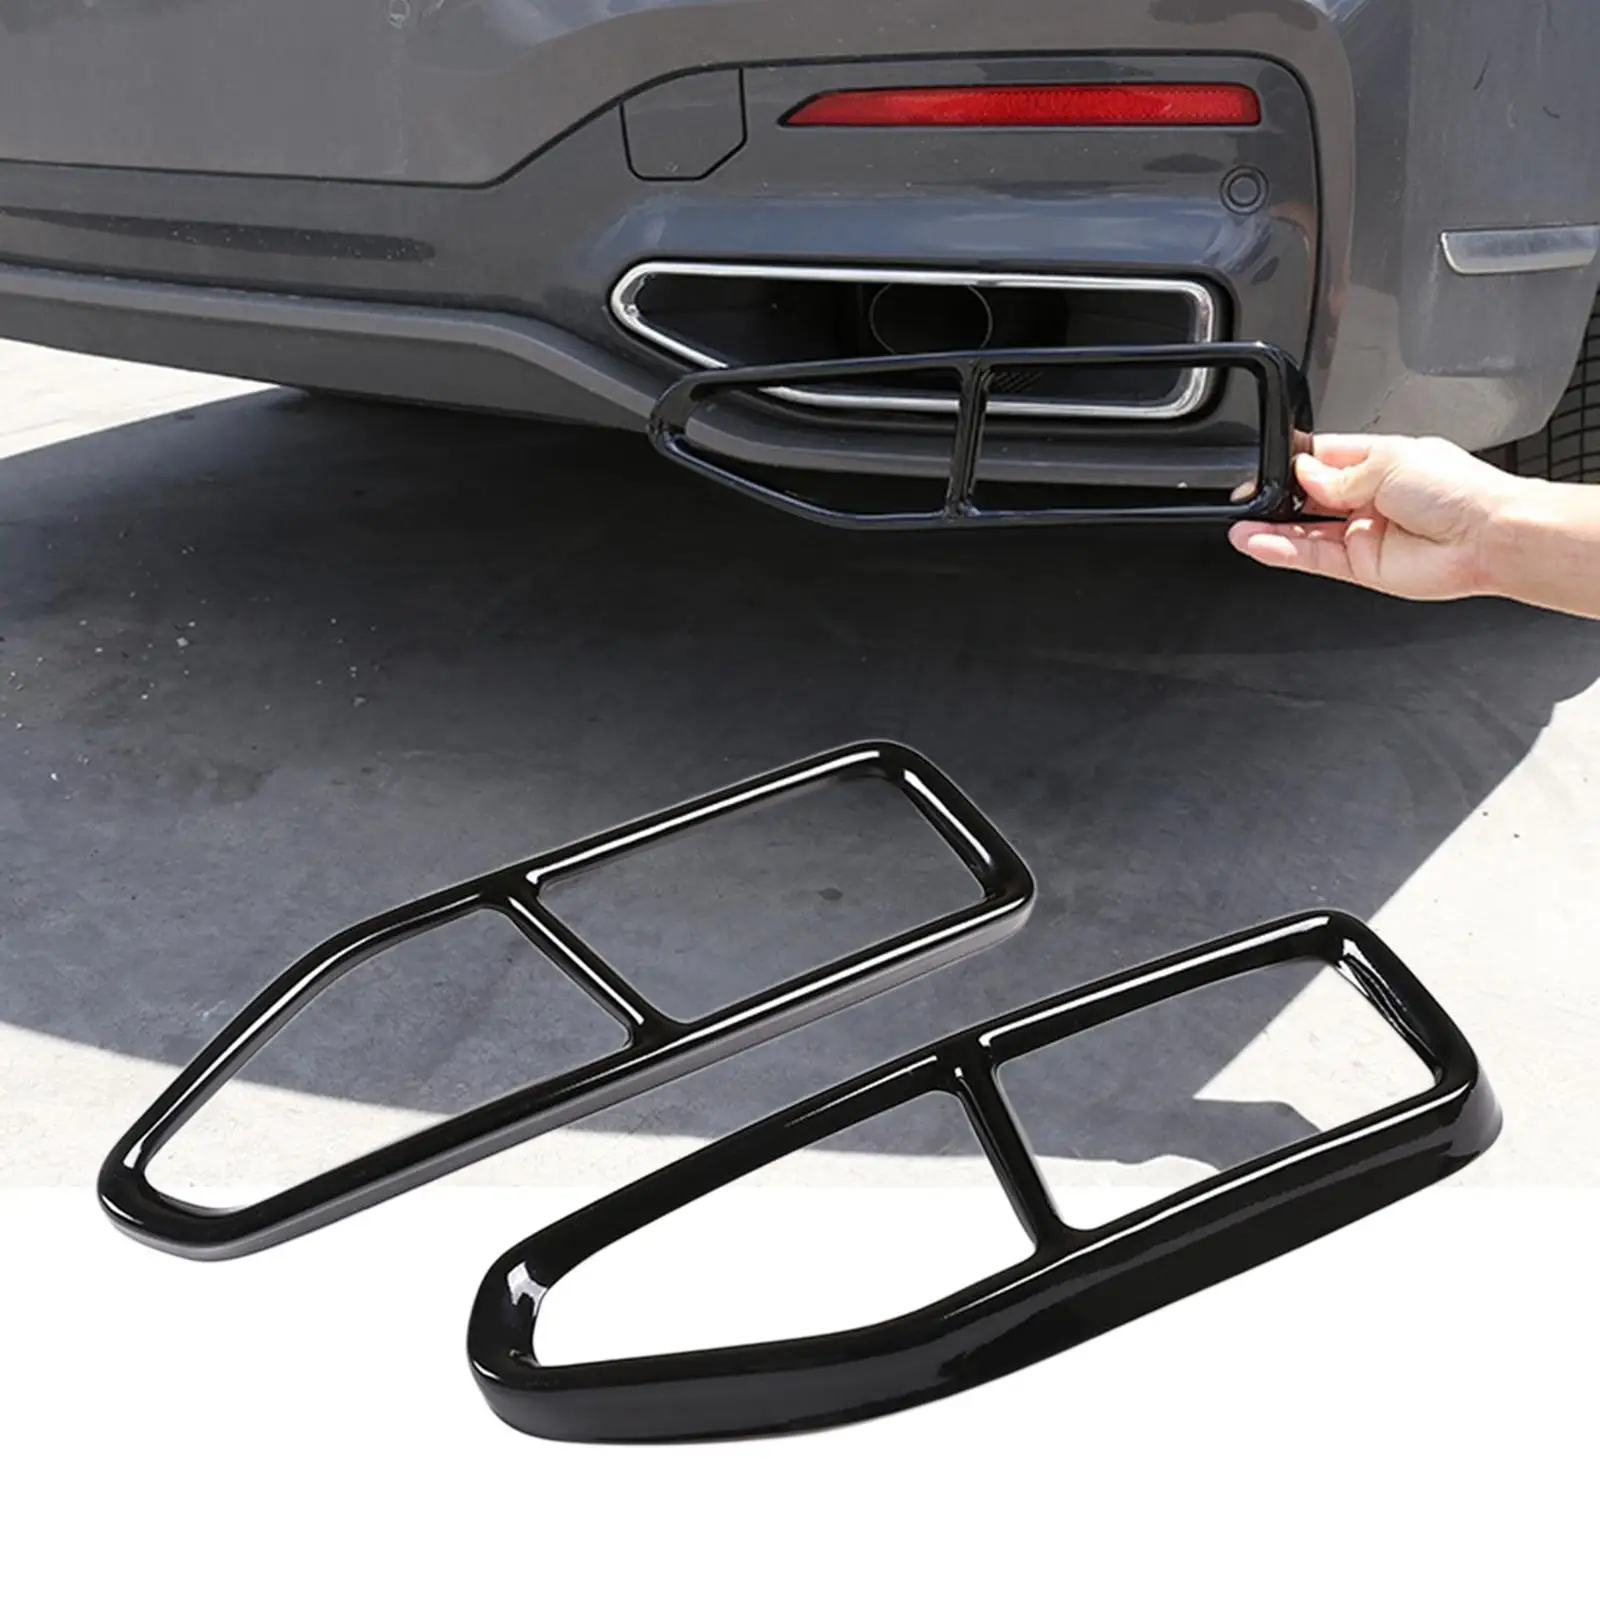 2 Pieces Stainless Steel Tailpipe Trim Frame Weatherproof for  7 G11